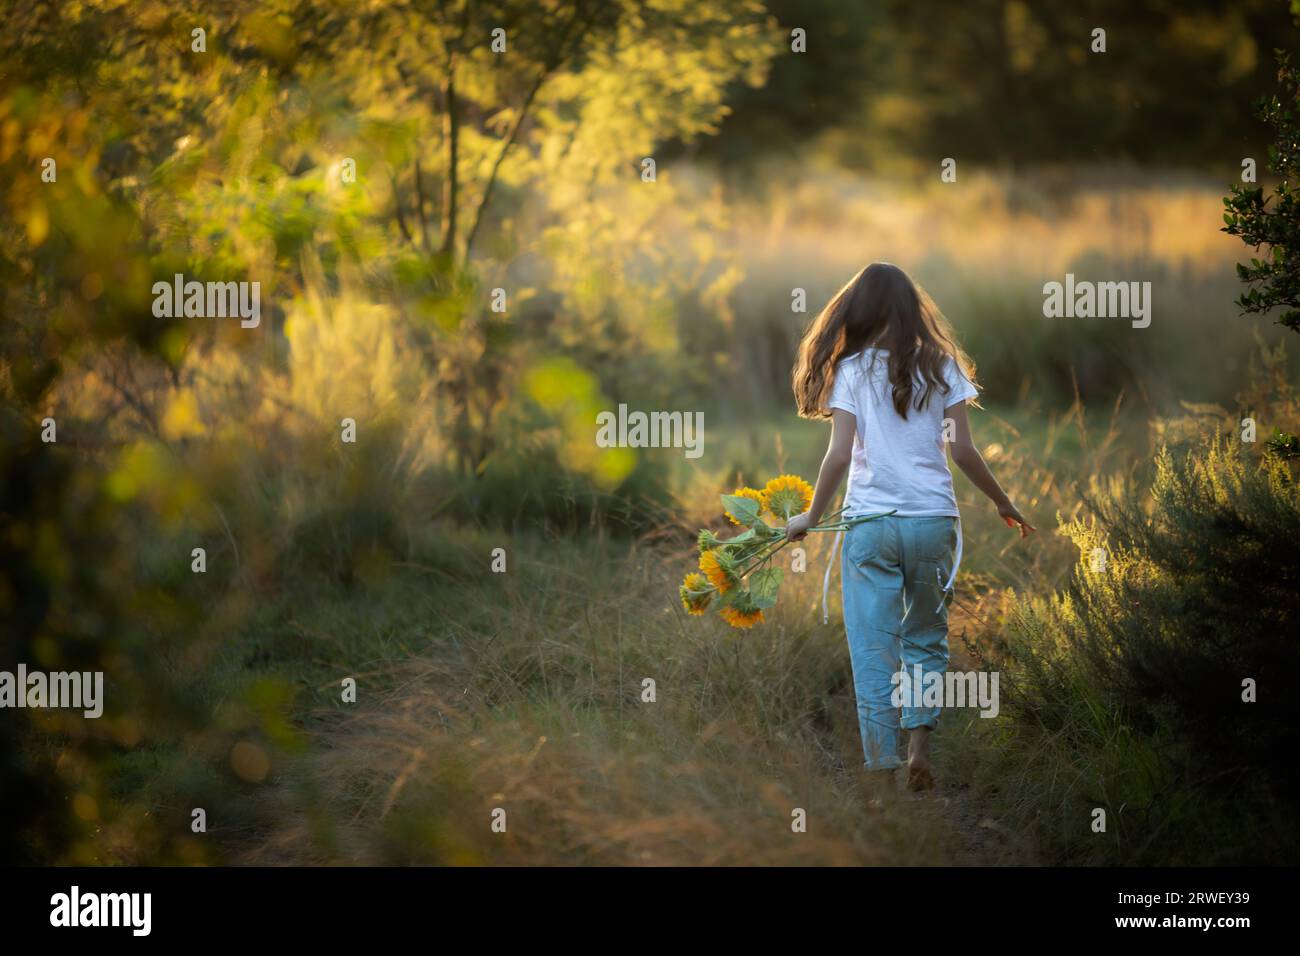 Rear view of a young girl walking through a field of long grass at sunset Stock Photo